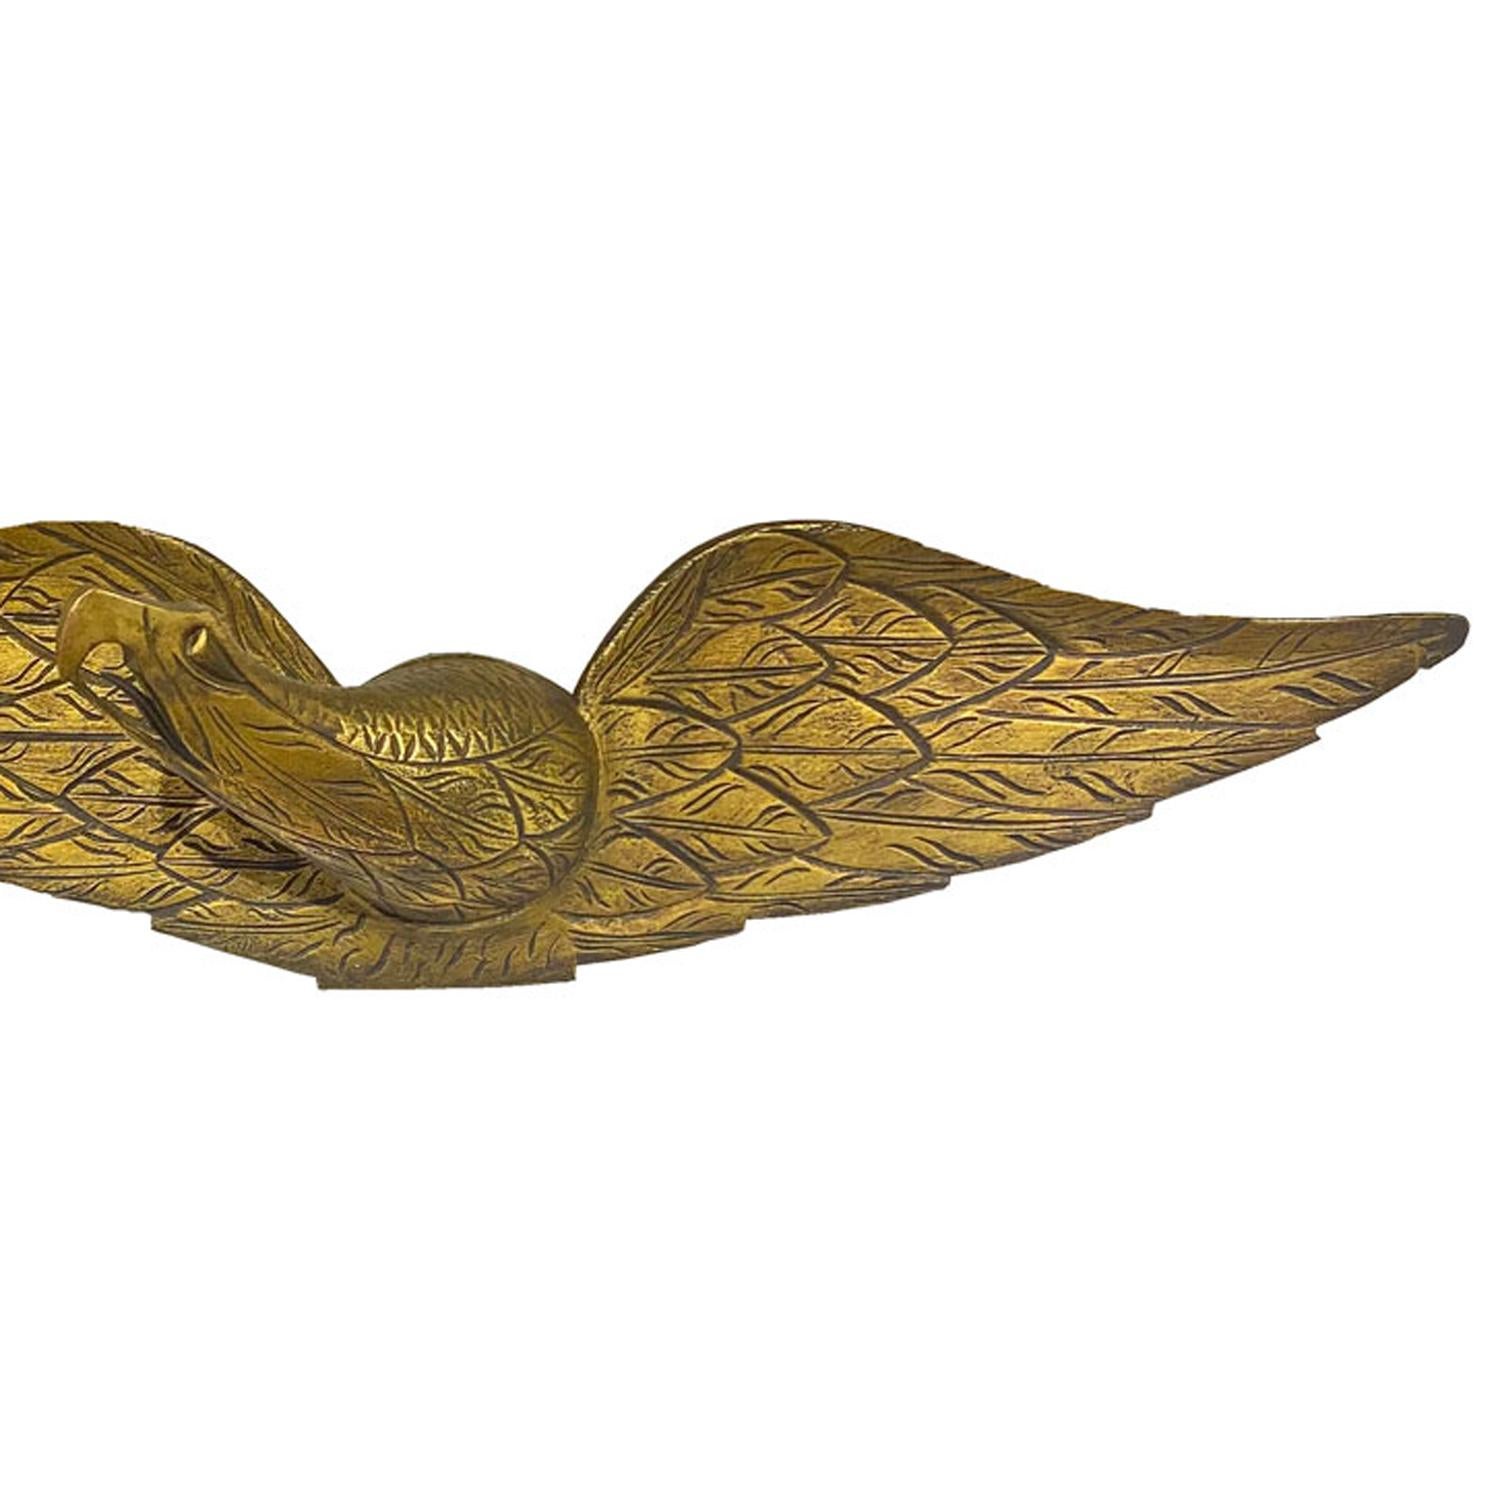 Folk Art American Carved and Gilded Eagle